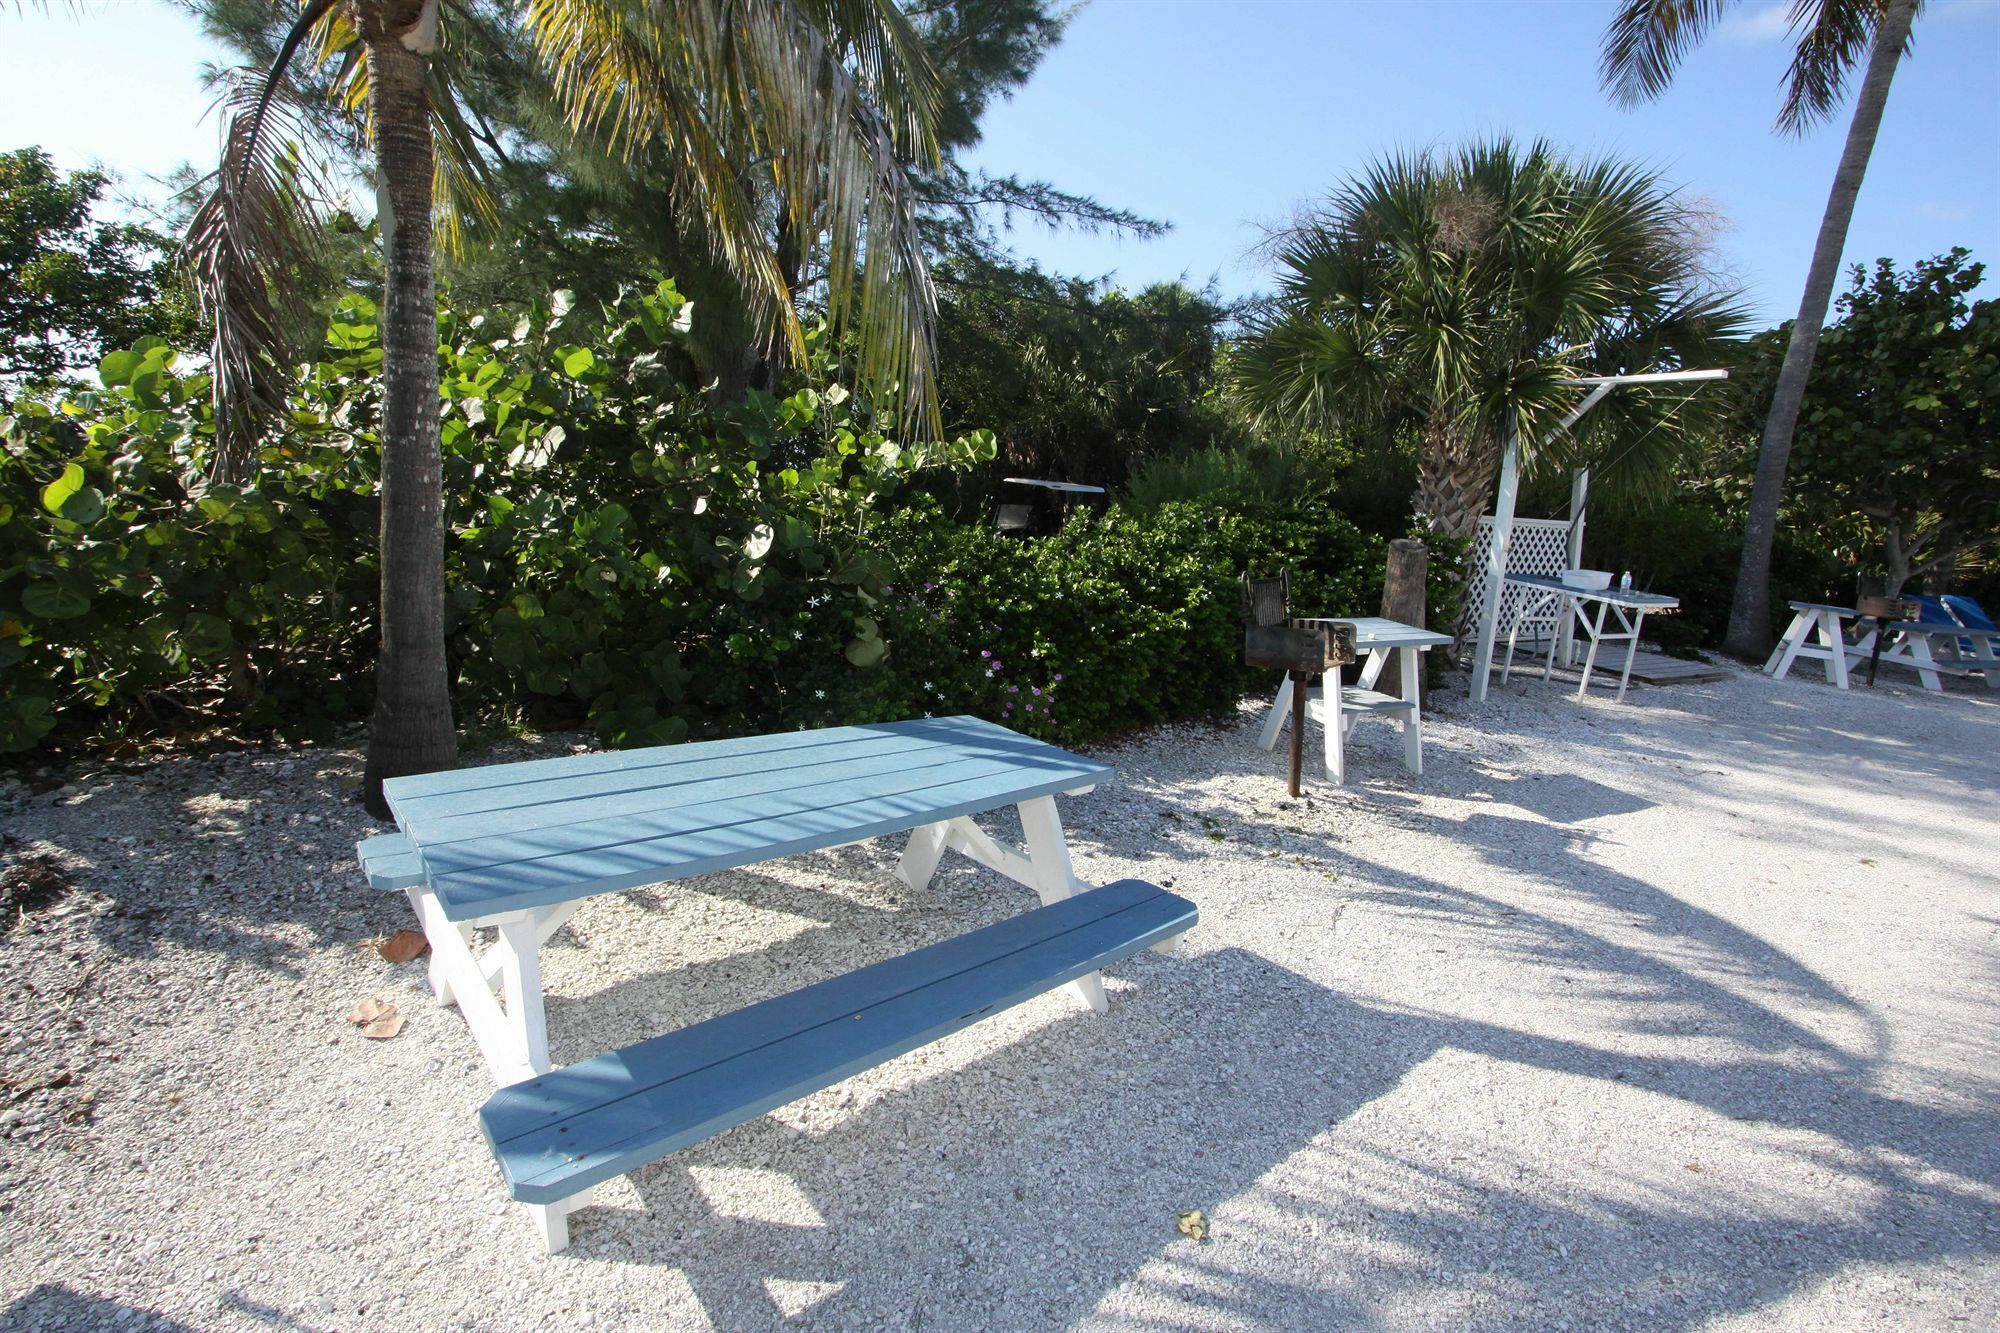 Tropical Winds Beachfront Motel And Cottages Sanibel Exterior photo